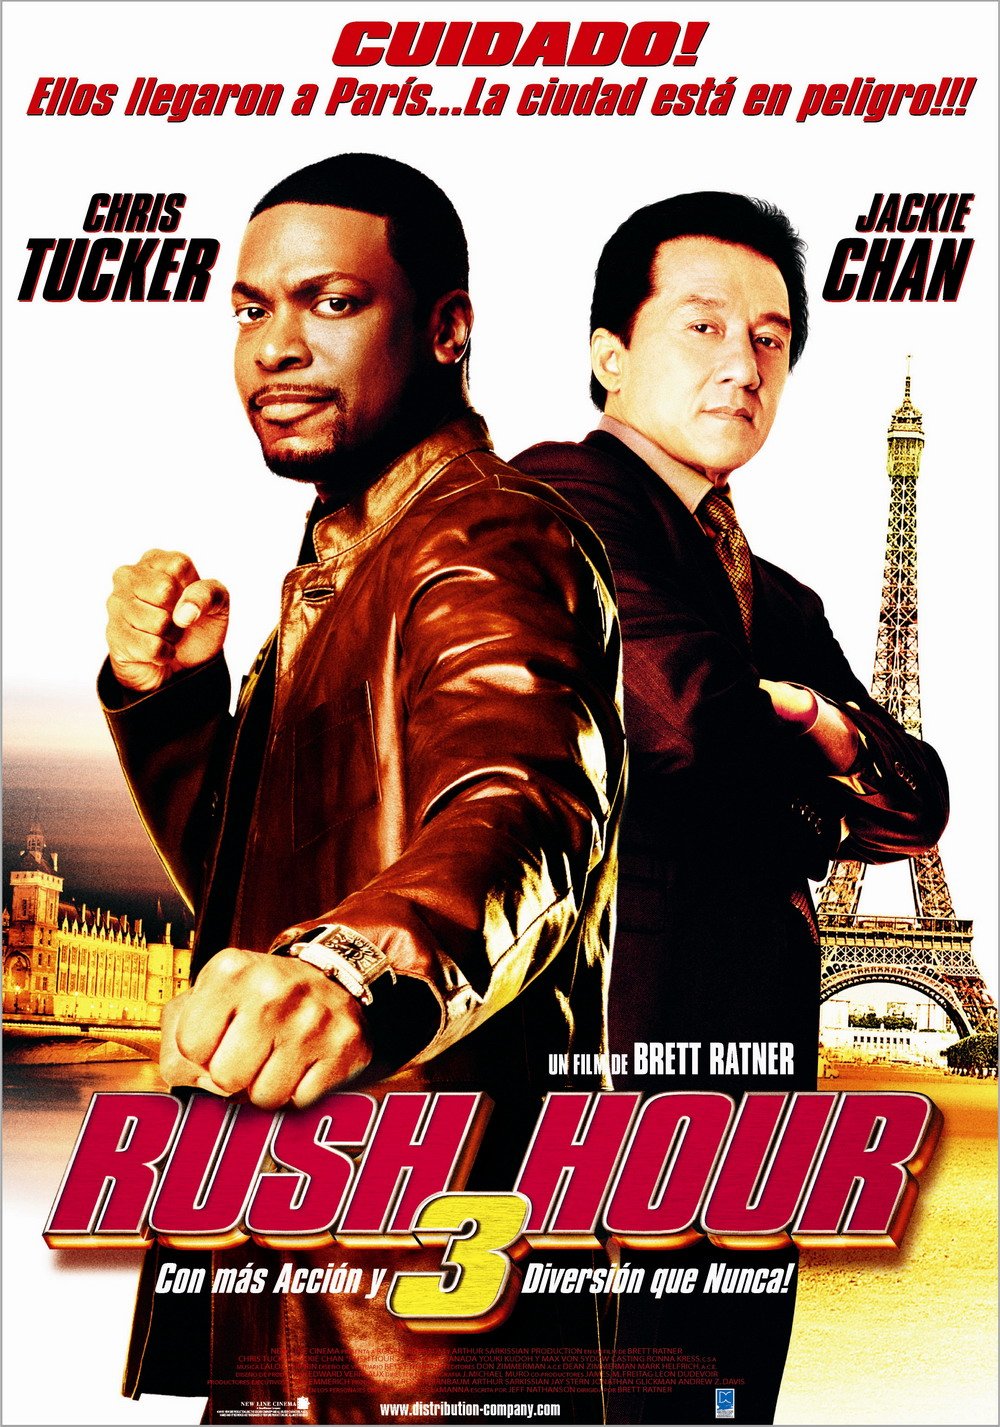 The Ruch Hour